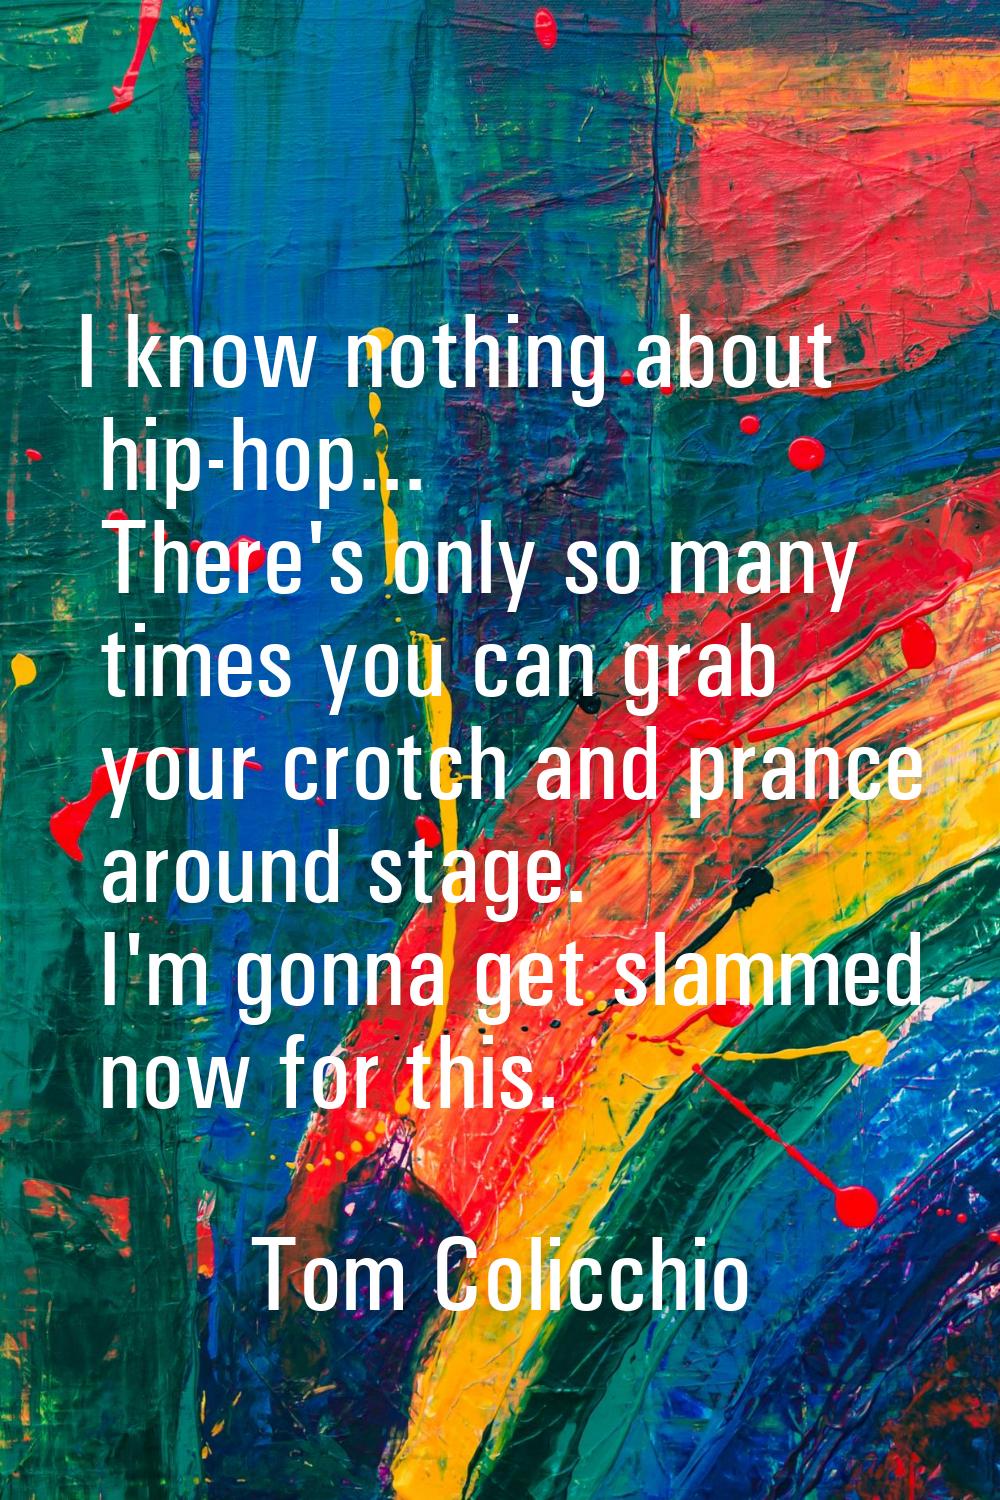 I know nothing about hip-hop... There's only so many times you can grab your crotch and prance arou